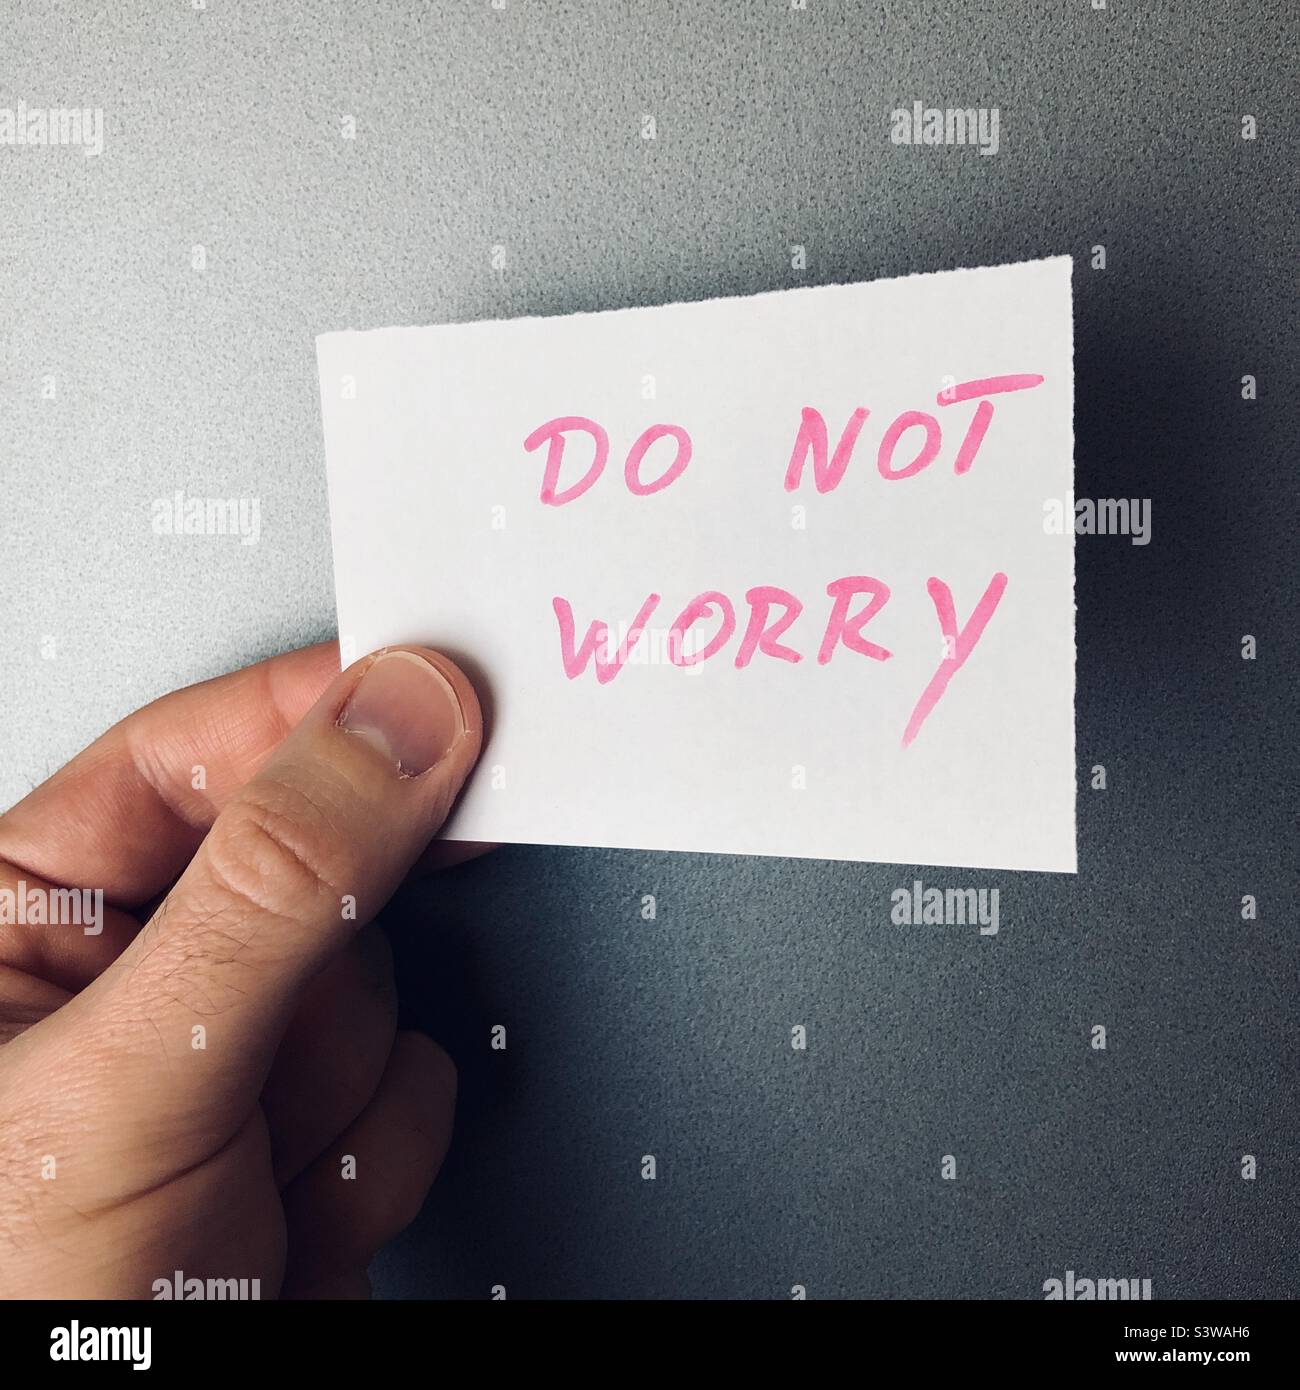 Do not worry motivation on a piece of paper Stock Photo